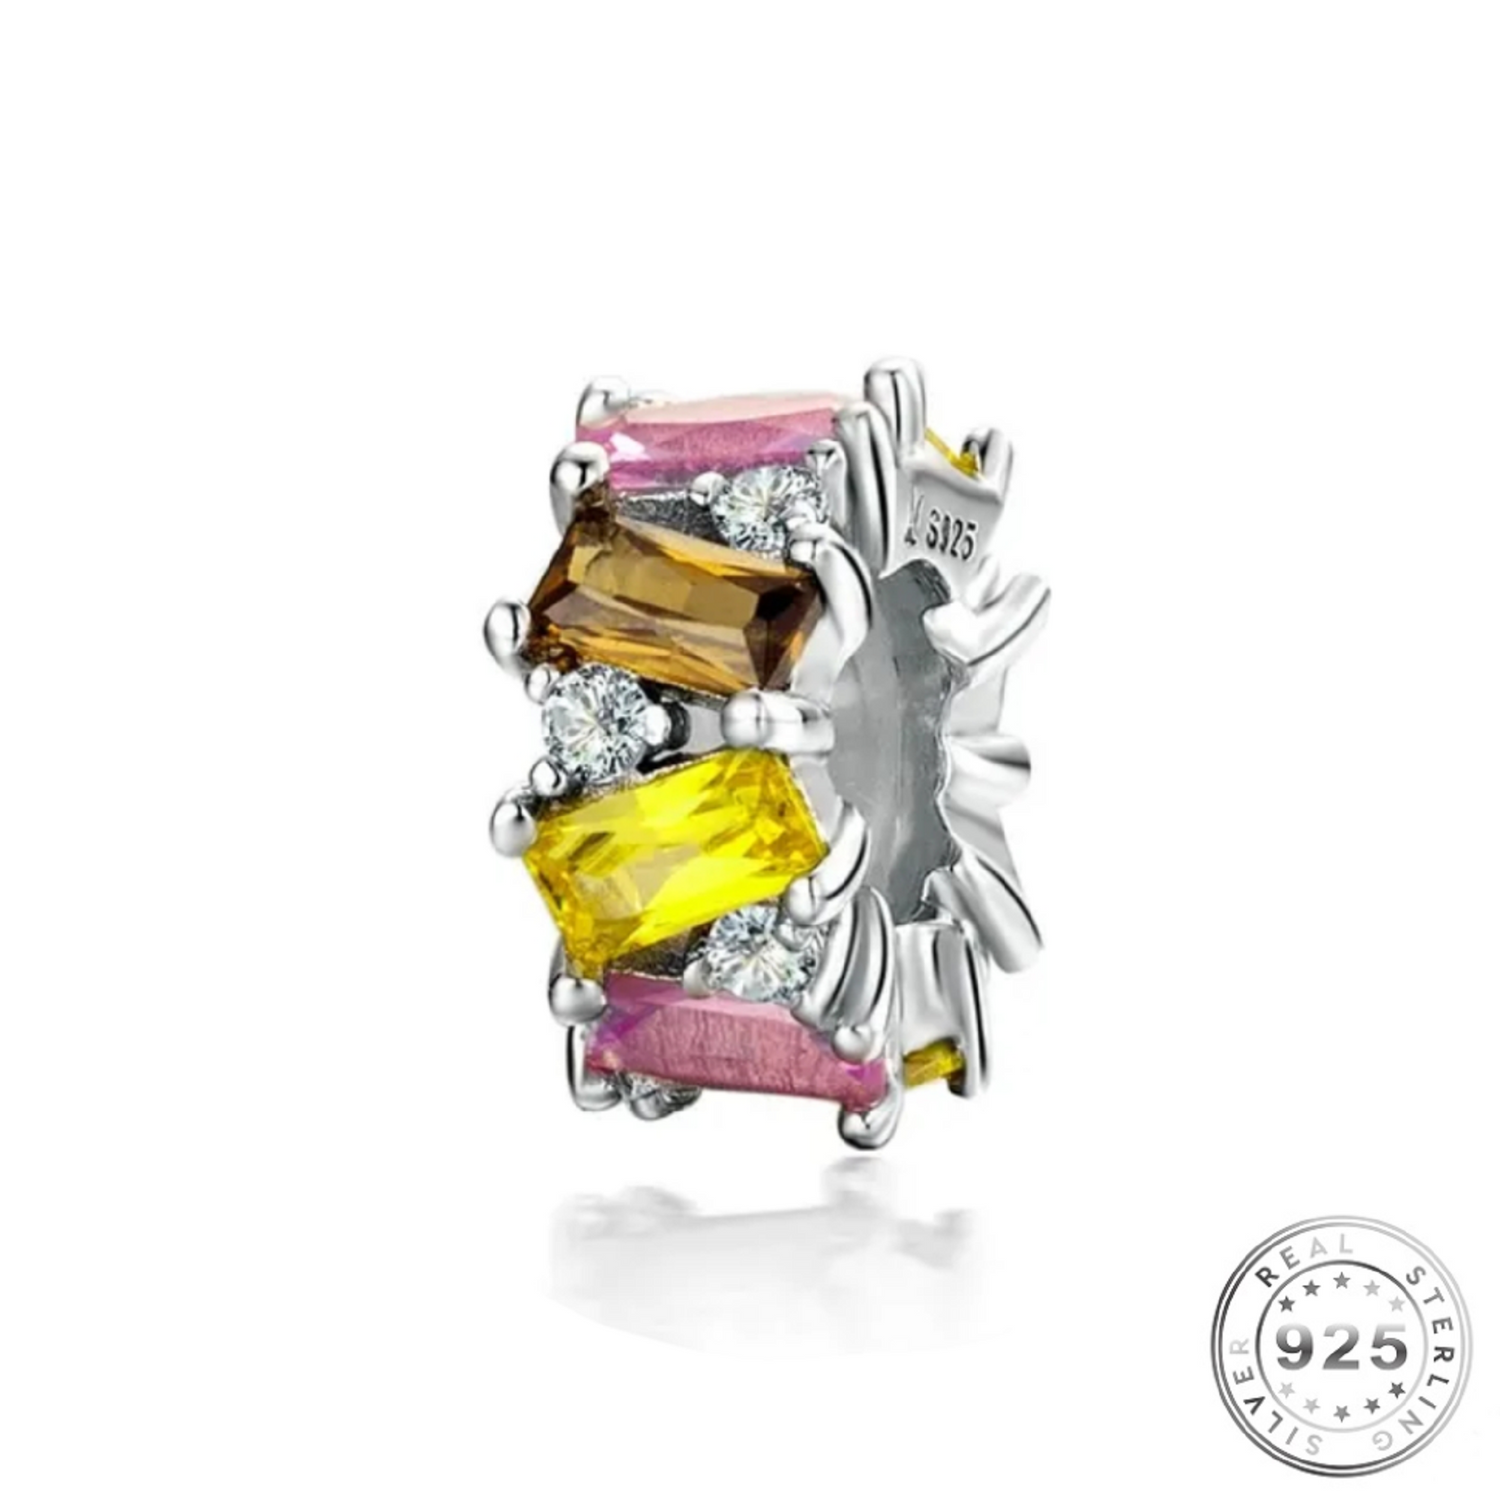 Crystal Spacer Charm 925 Sterling Silver pink fits pandora